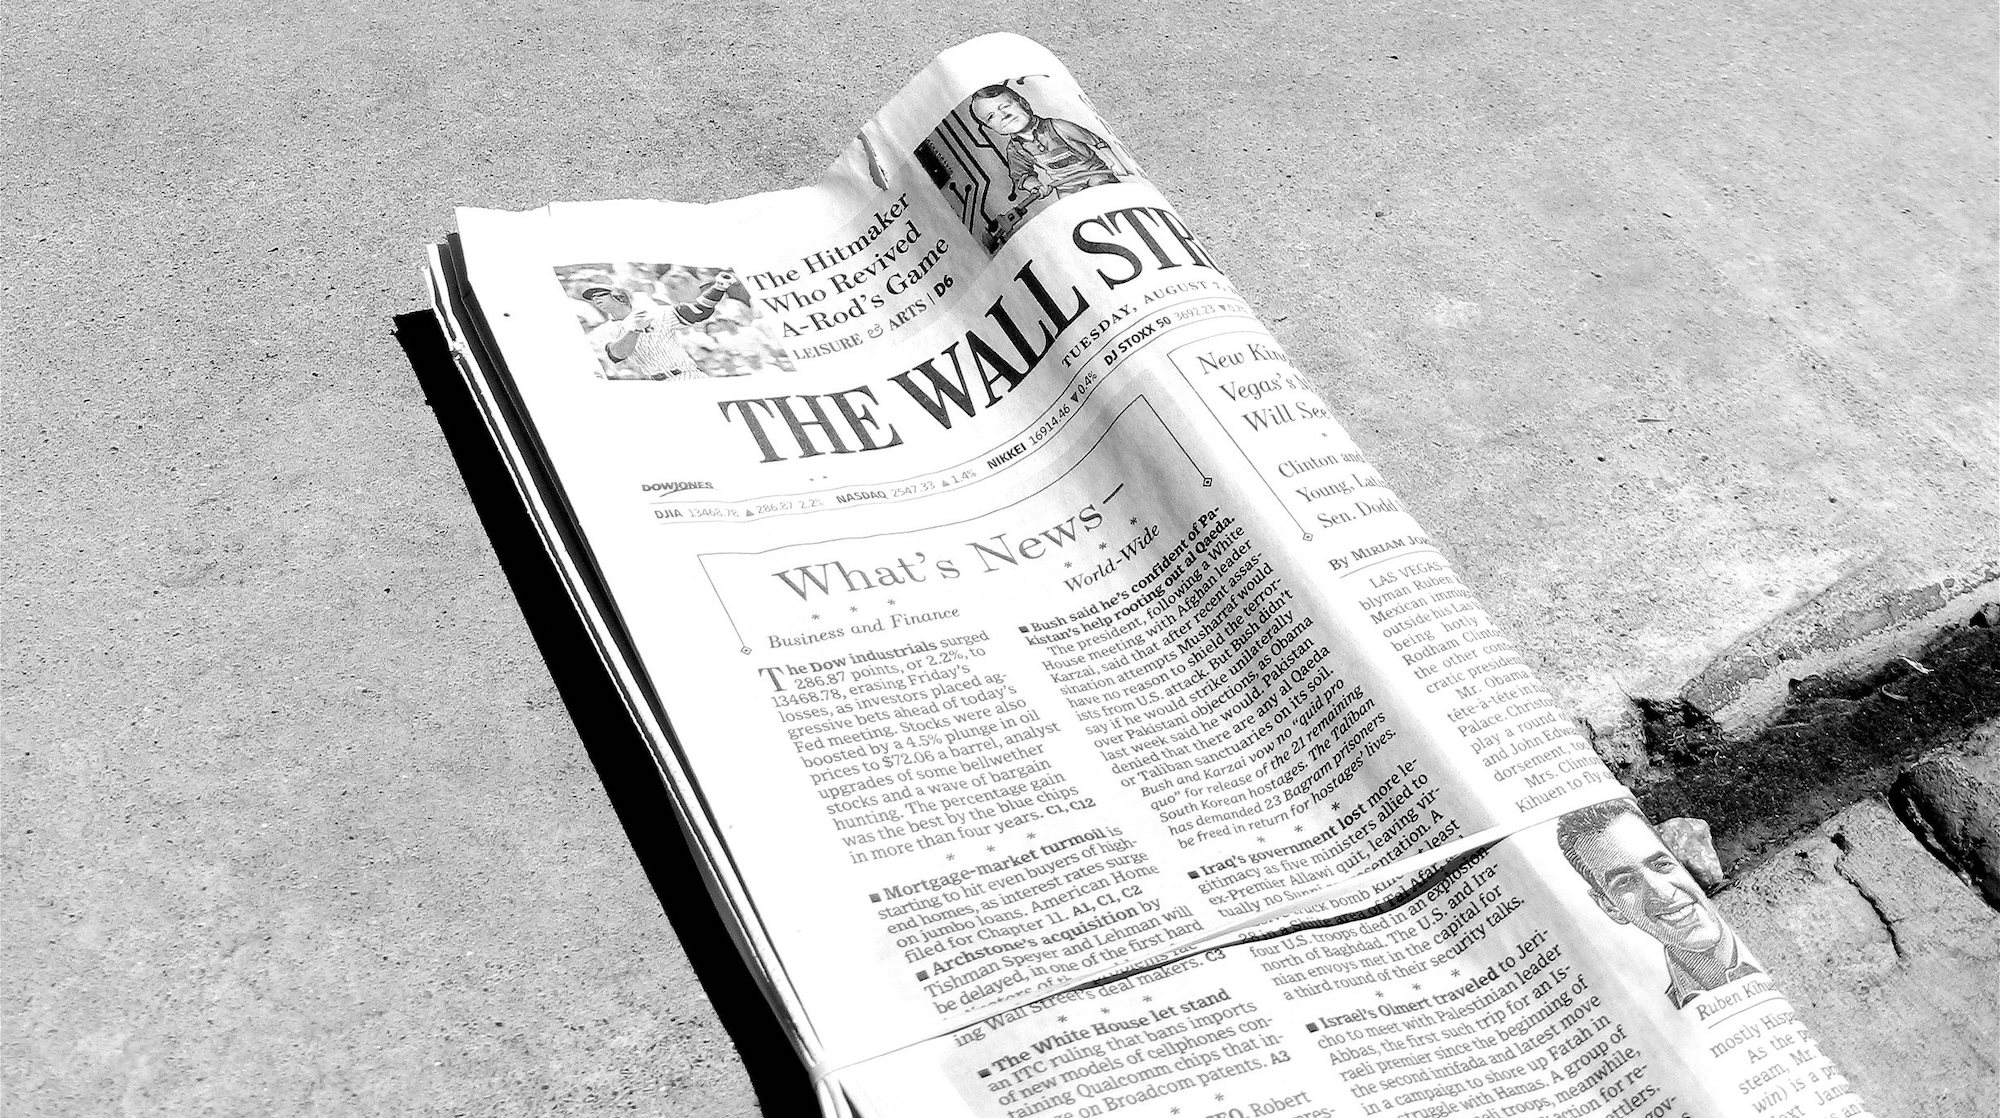 Becoming the Wall Street Journal 